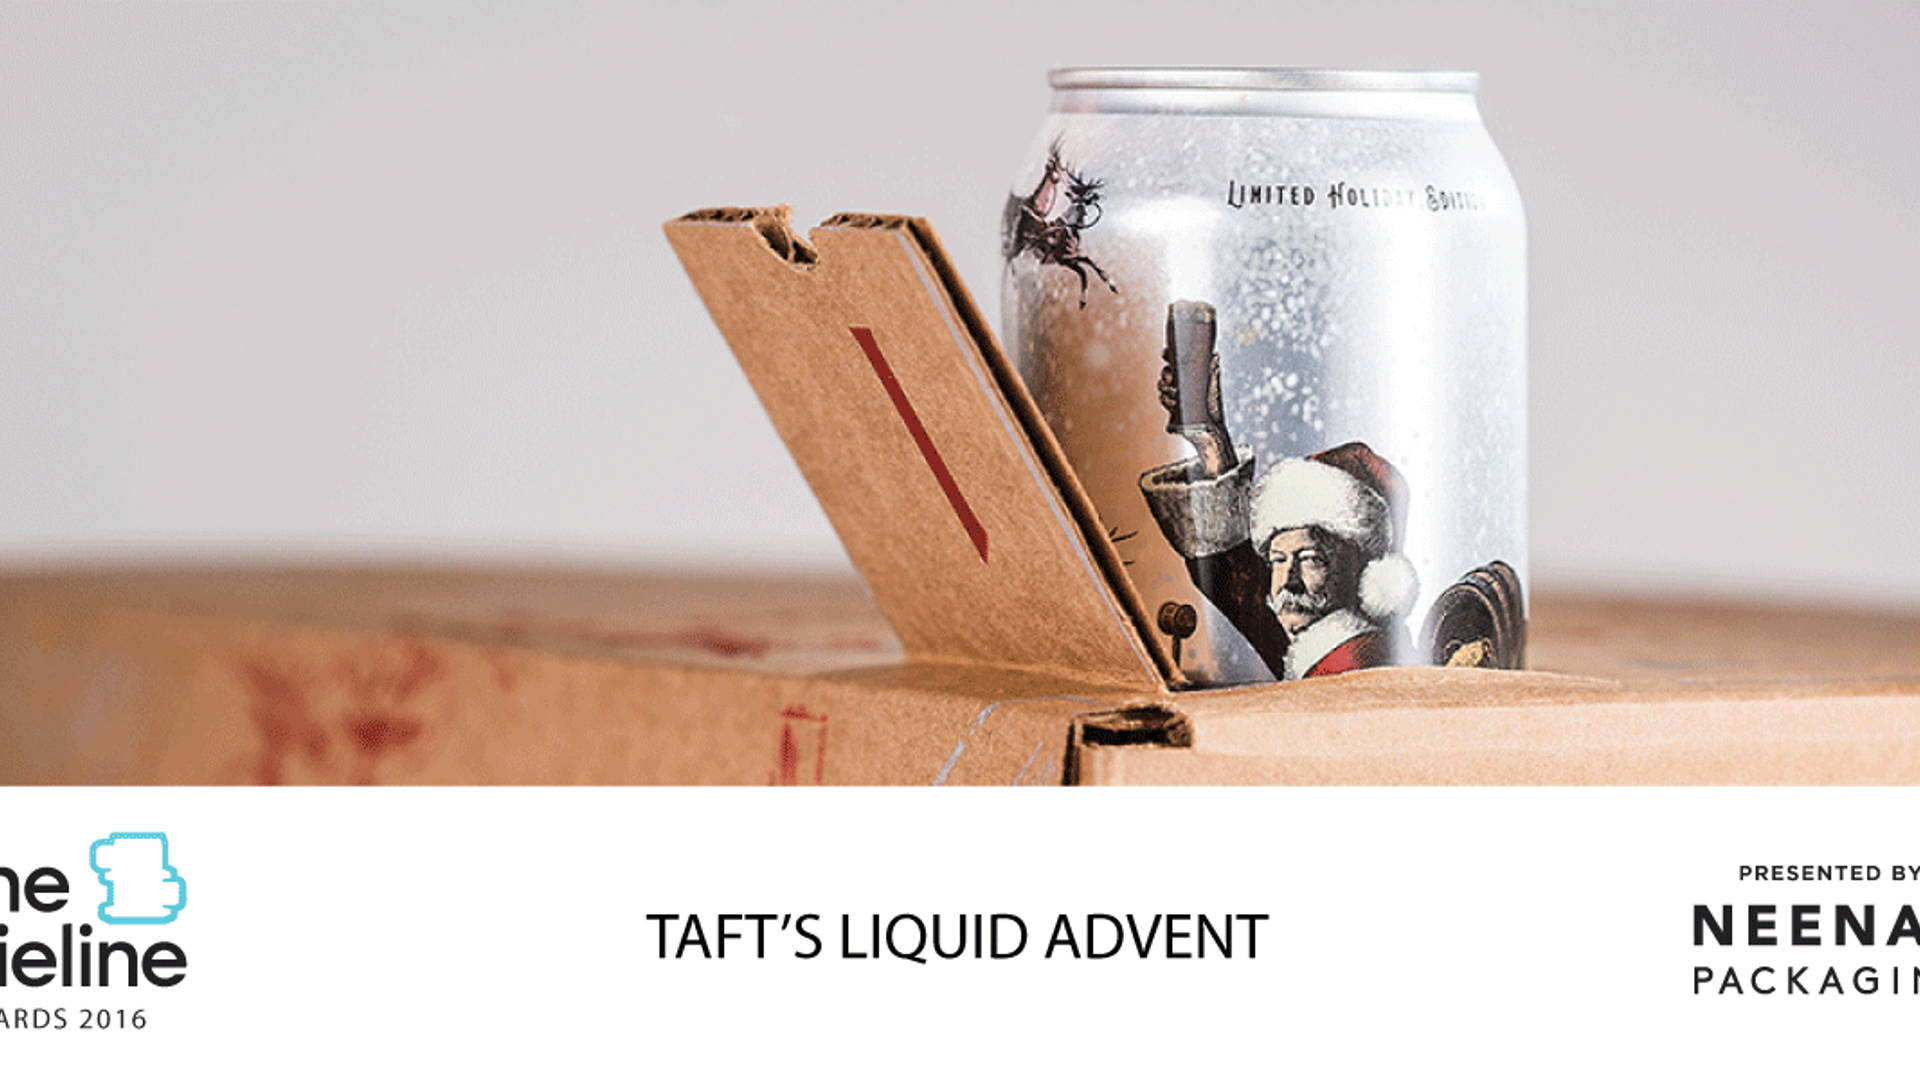 Featured image for The Dieline Awards 2016 Outstanding Achievements: Taft's Liquid Advent